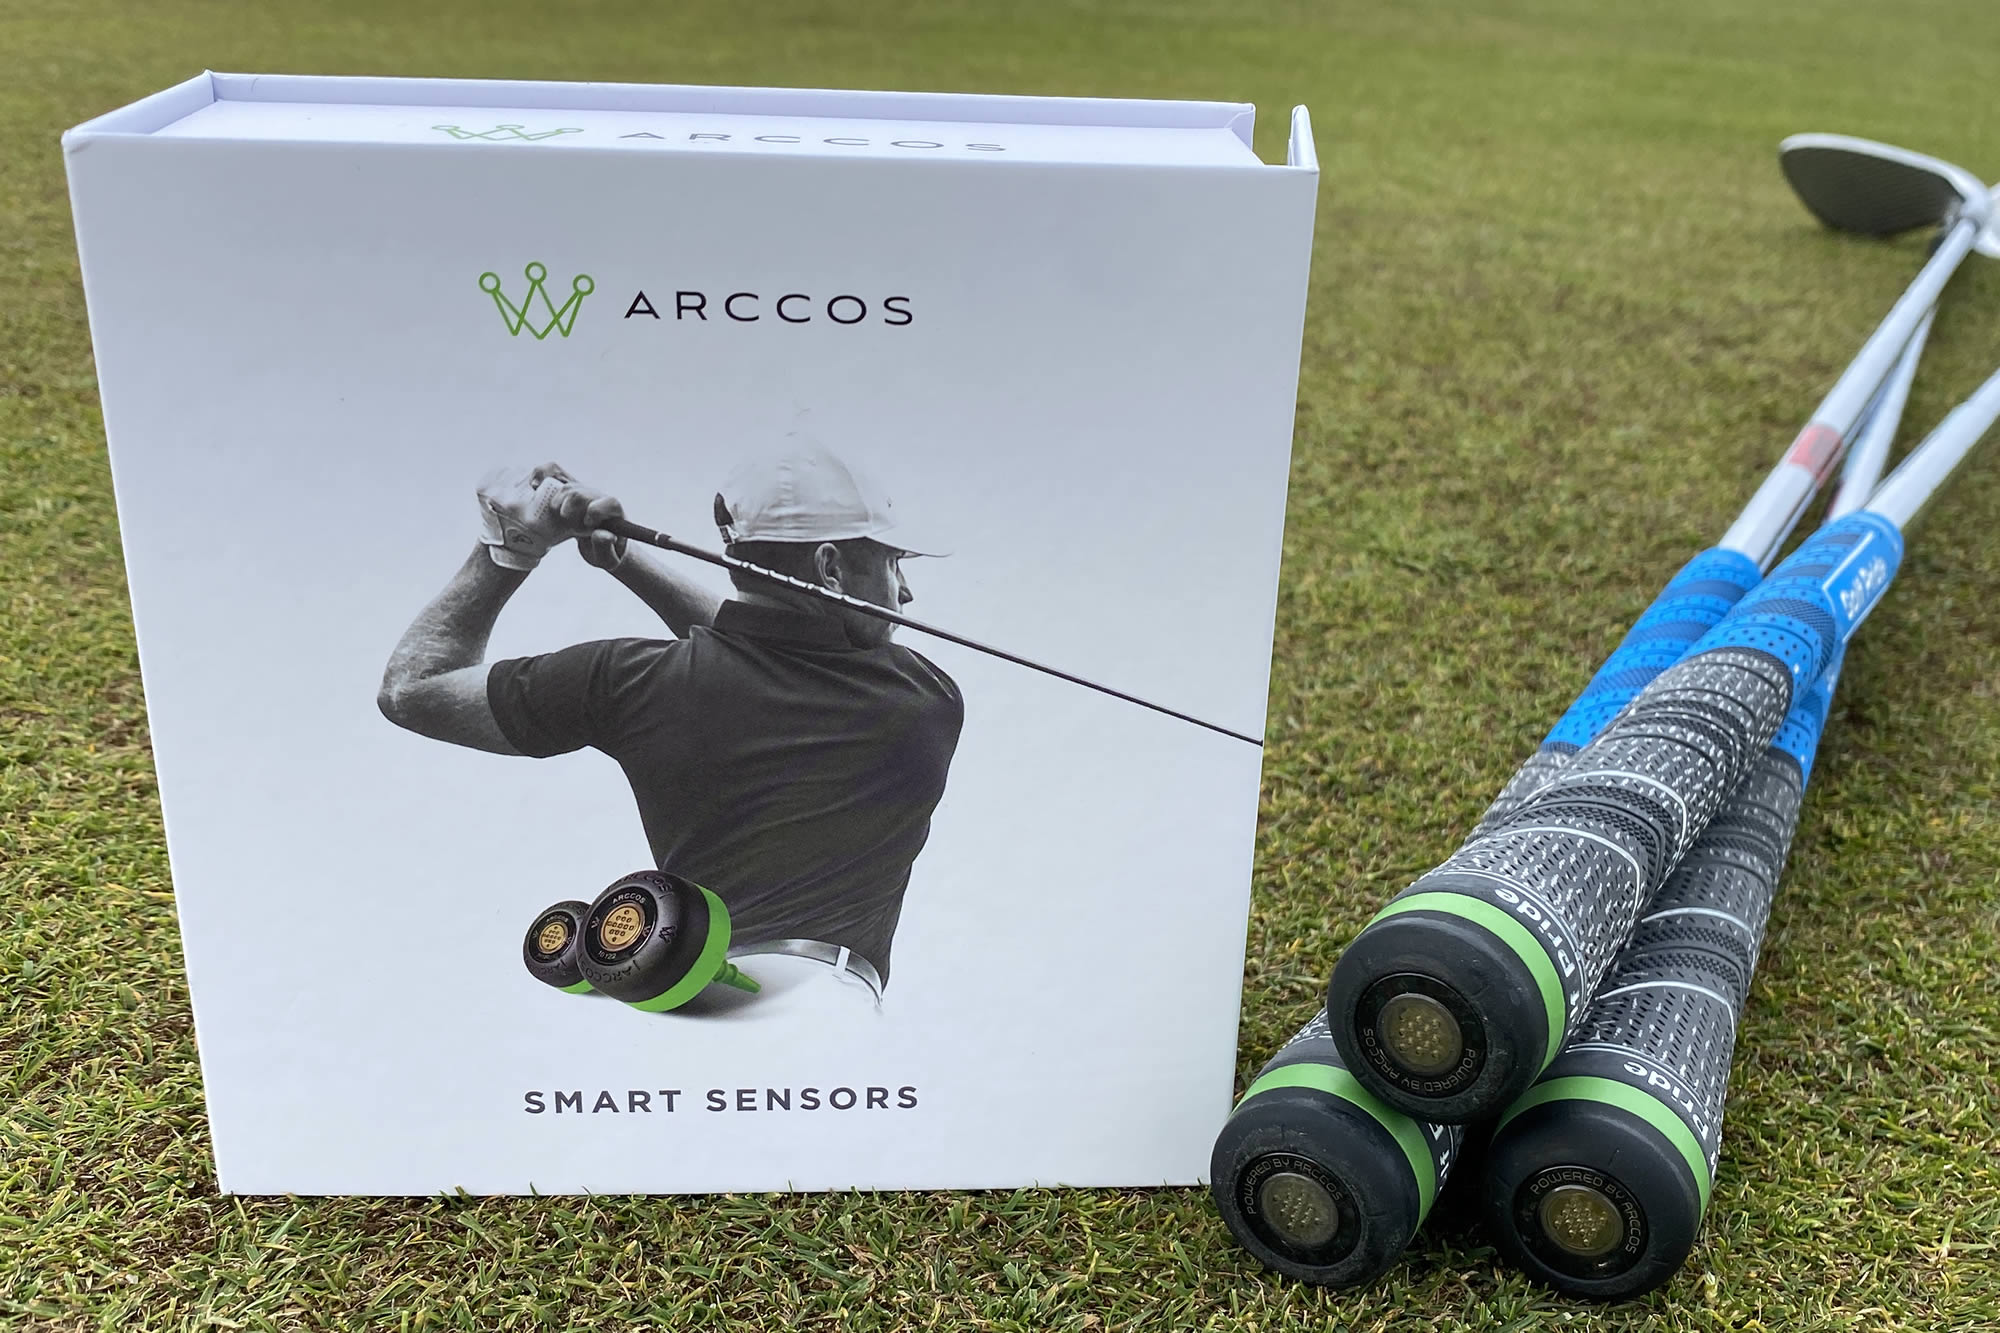 Arccos introduces smart club distances and putt tracking upgrades